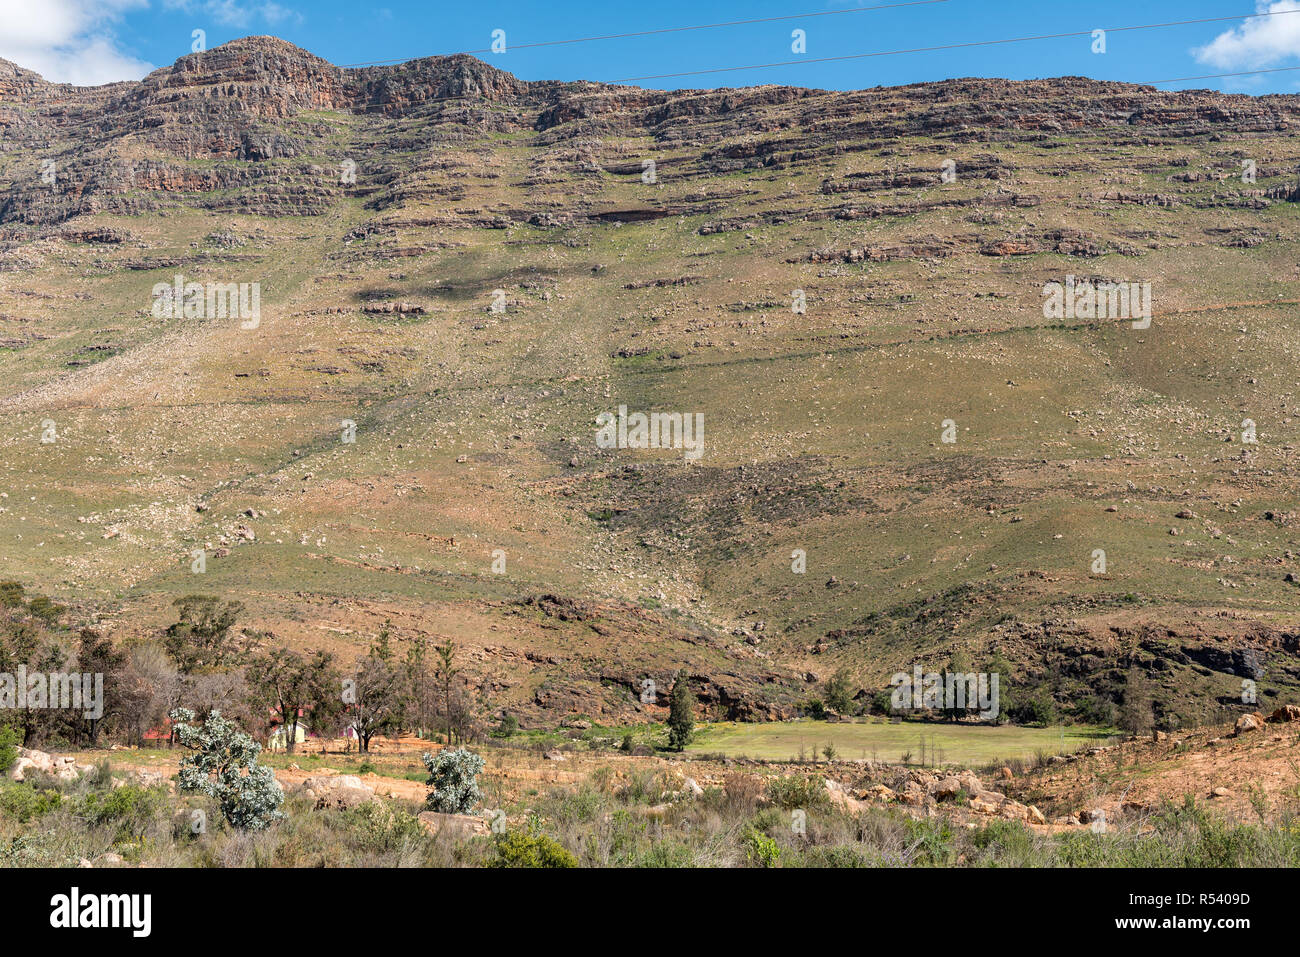 A view of Skilpaddorp in the Cederberg Mountains of the Western Cape Province of South Africa. A school building and rugby field are visible Stock Photo